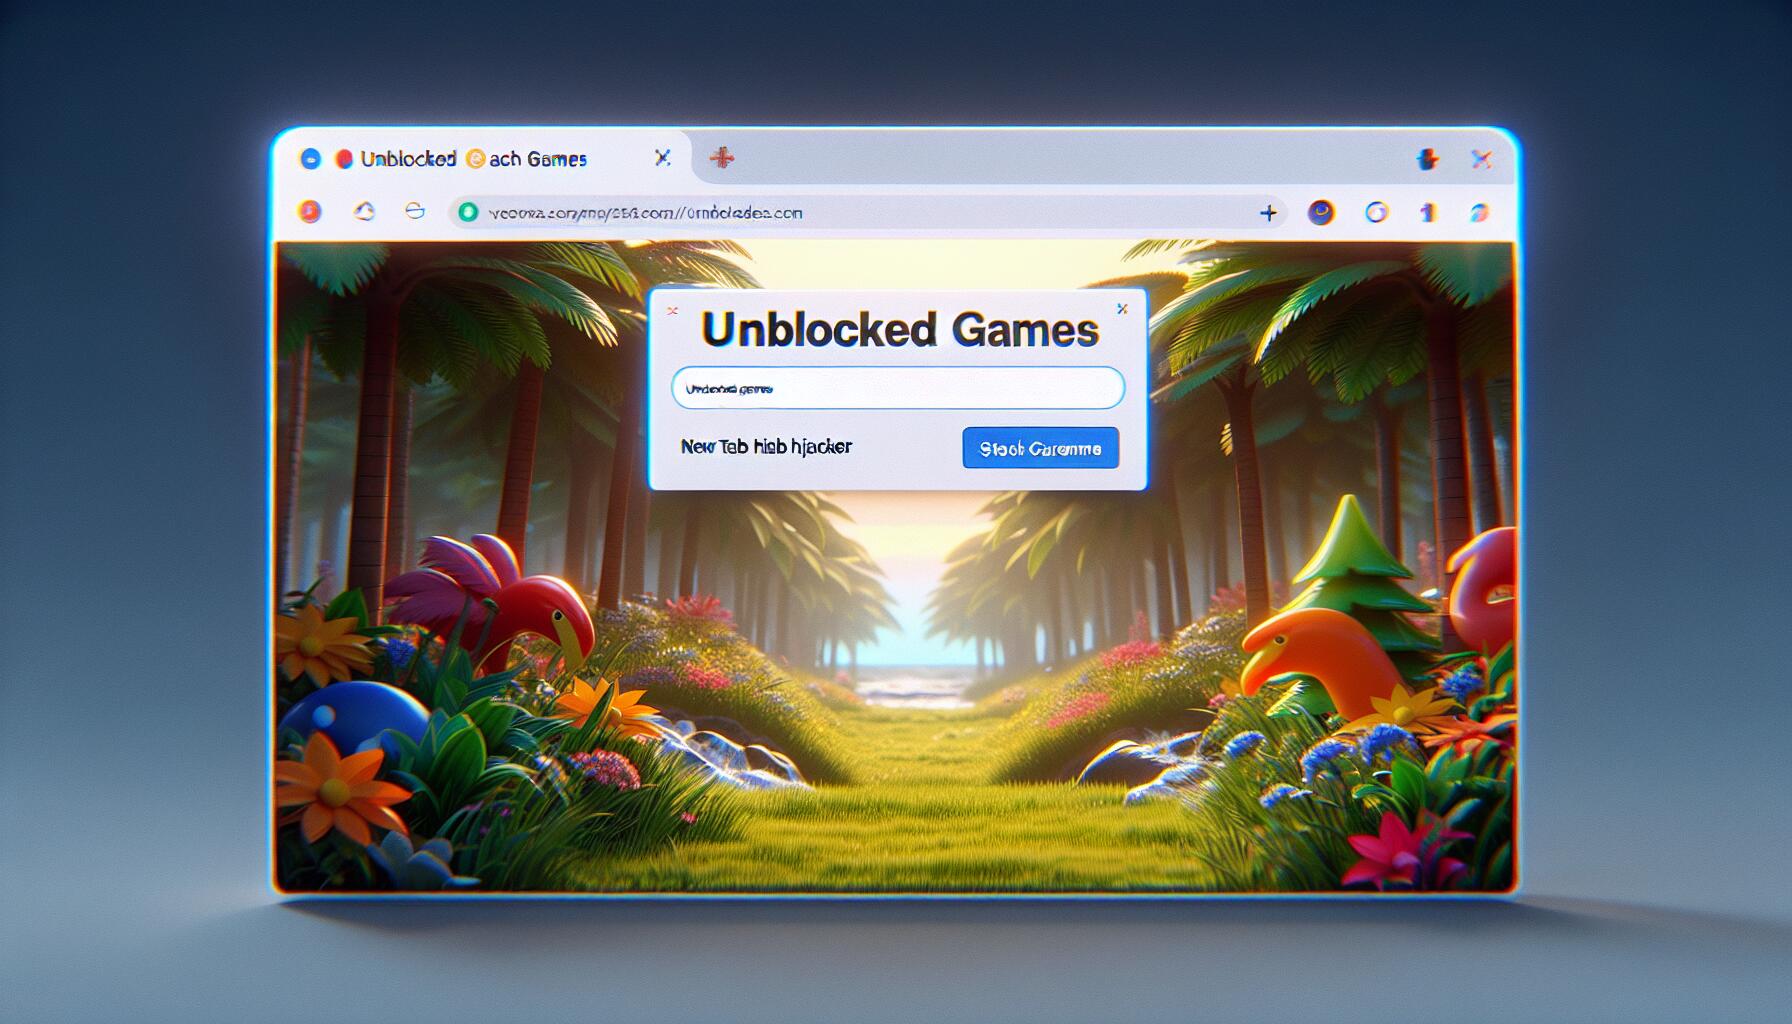 unblocked games – new tab